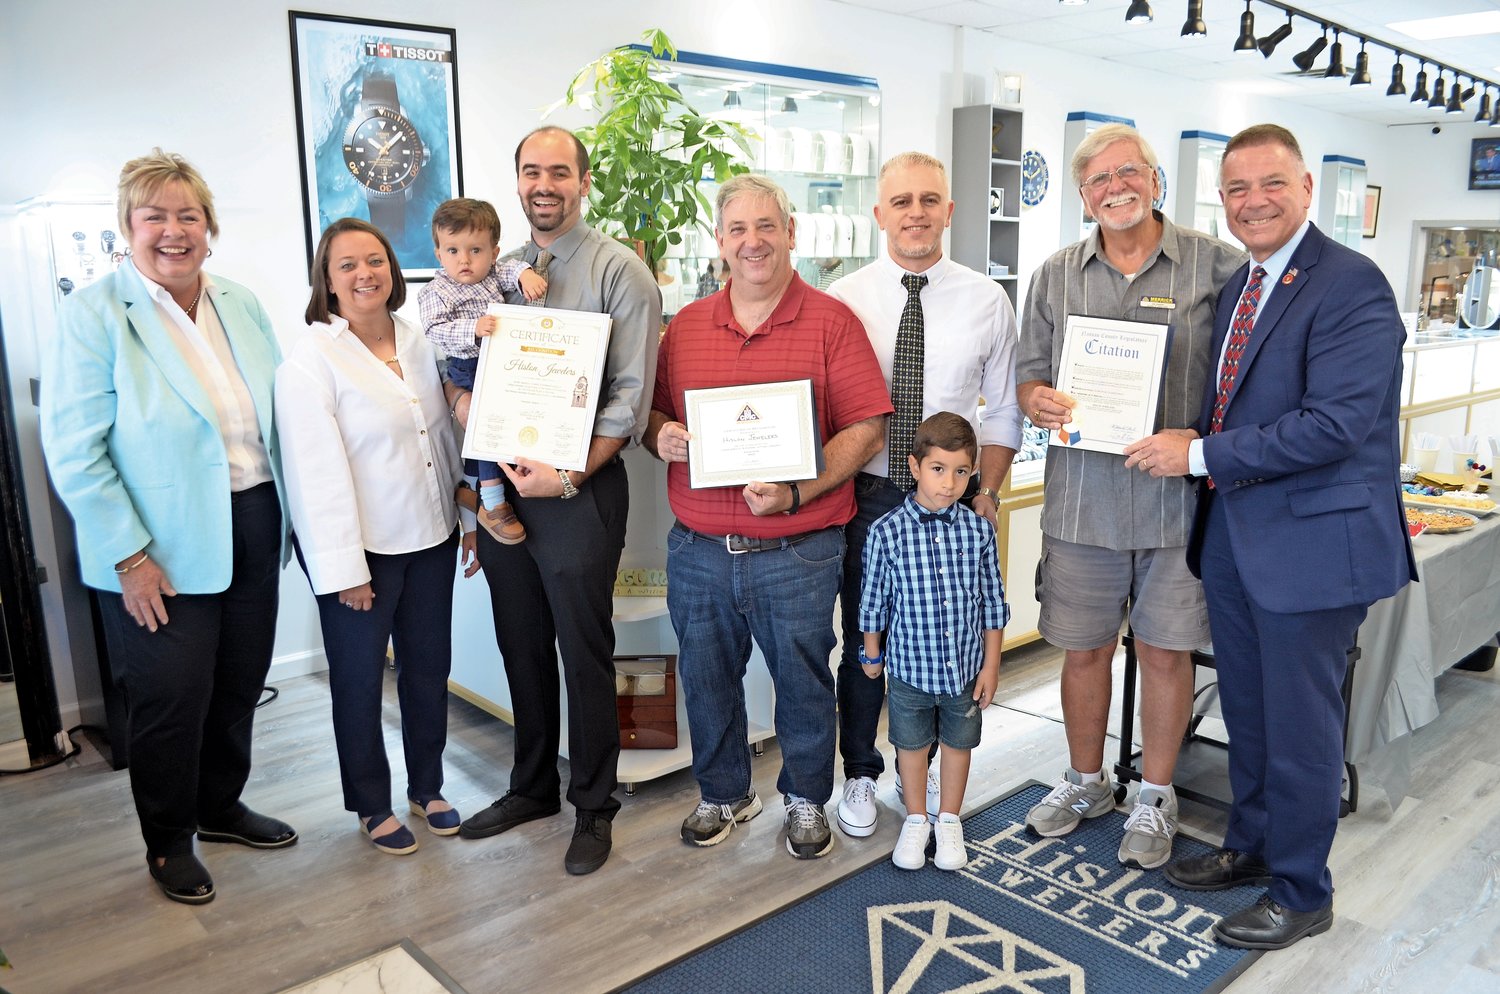 Hislon Jewelers on Merrick Road in  Merrick has its roots in the famous Hislon Watches, from Jeff Kaspar’s family. 

From left were Hempstead Town Clerk Kate Murray, Business and Marketing Manager and wife Adrien Ricci, son Rocco, owner Jeff Kaspar, President of the Merrick Chamber of Commerce Ira Reiter, jejweler Ibo and his son Ali, Merrick Chamber of Commerce member Joe Baker and County Legislator Steve Rhoads.